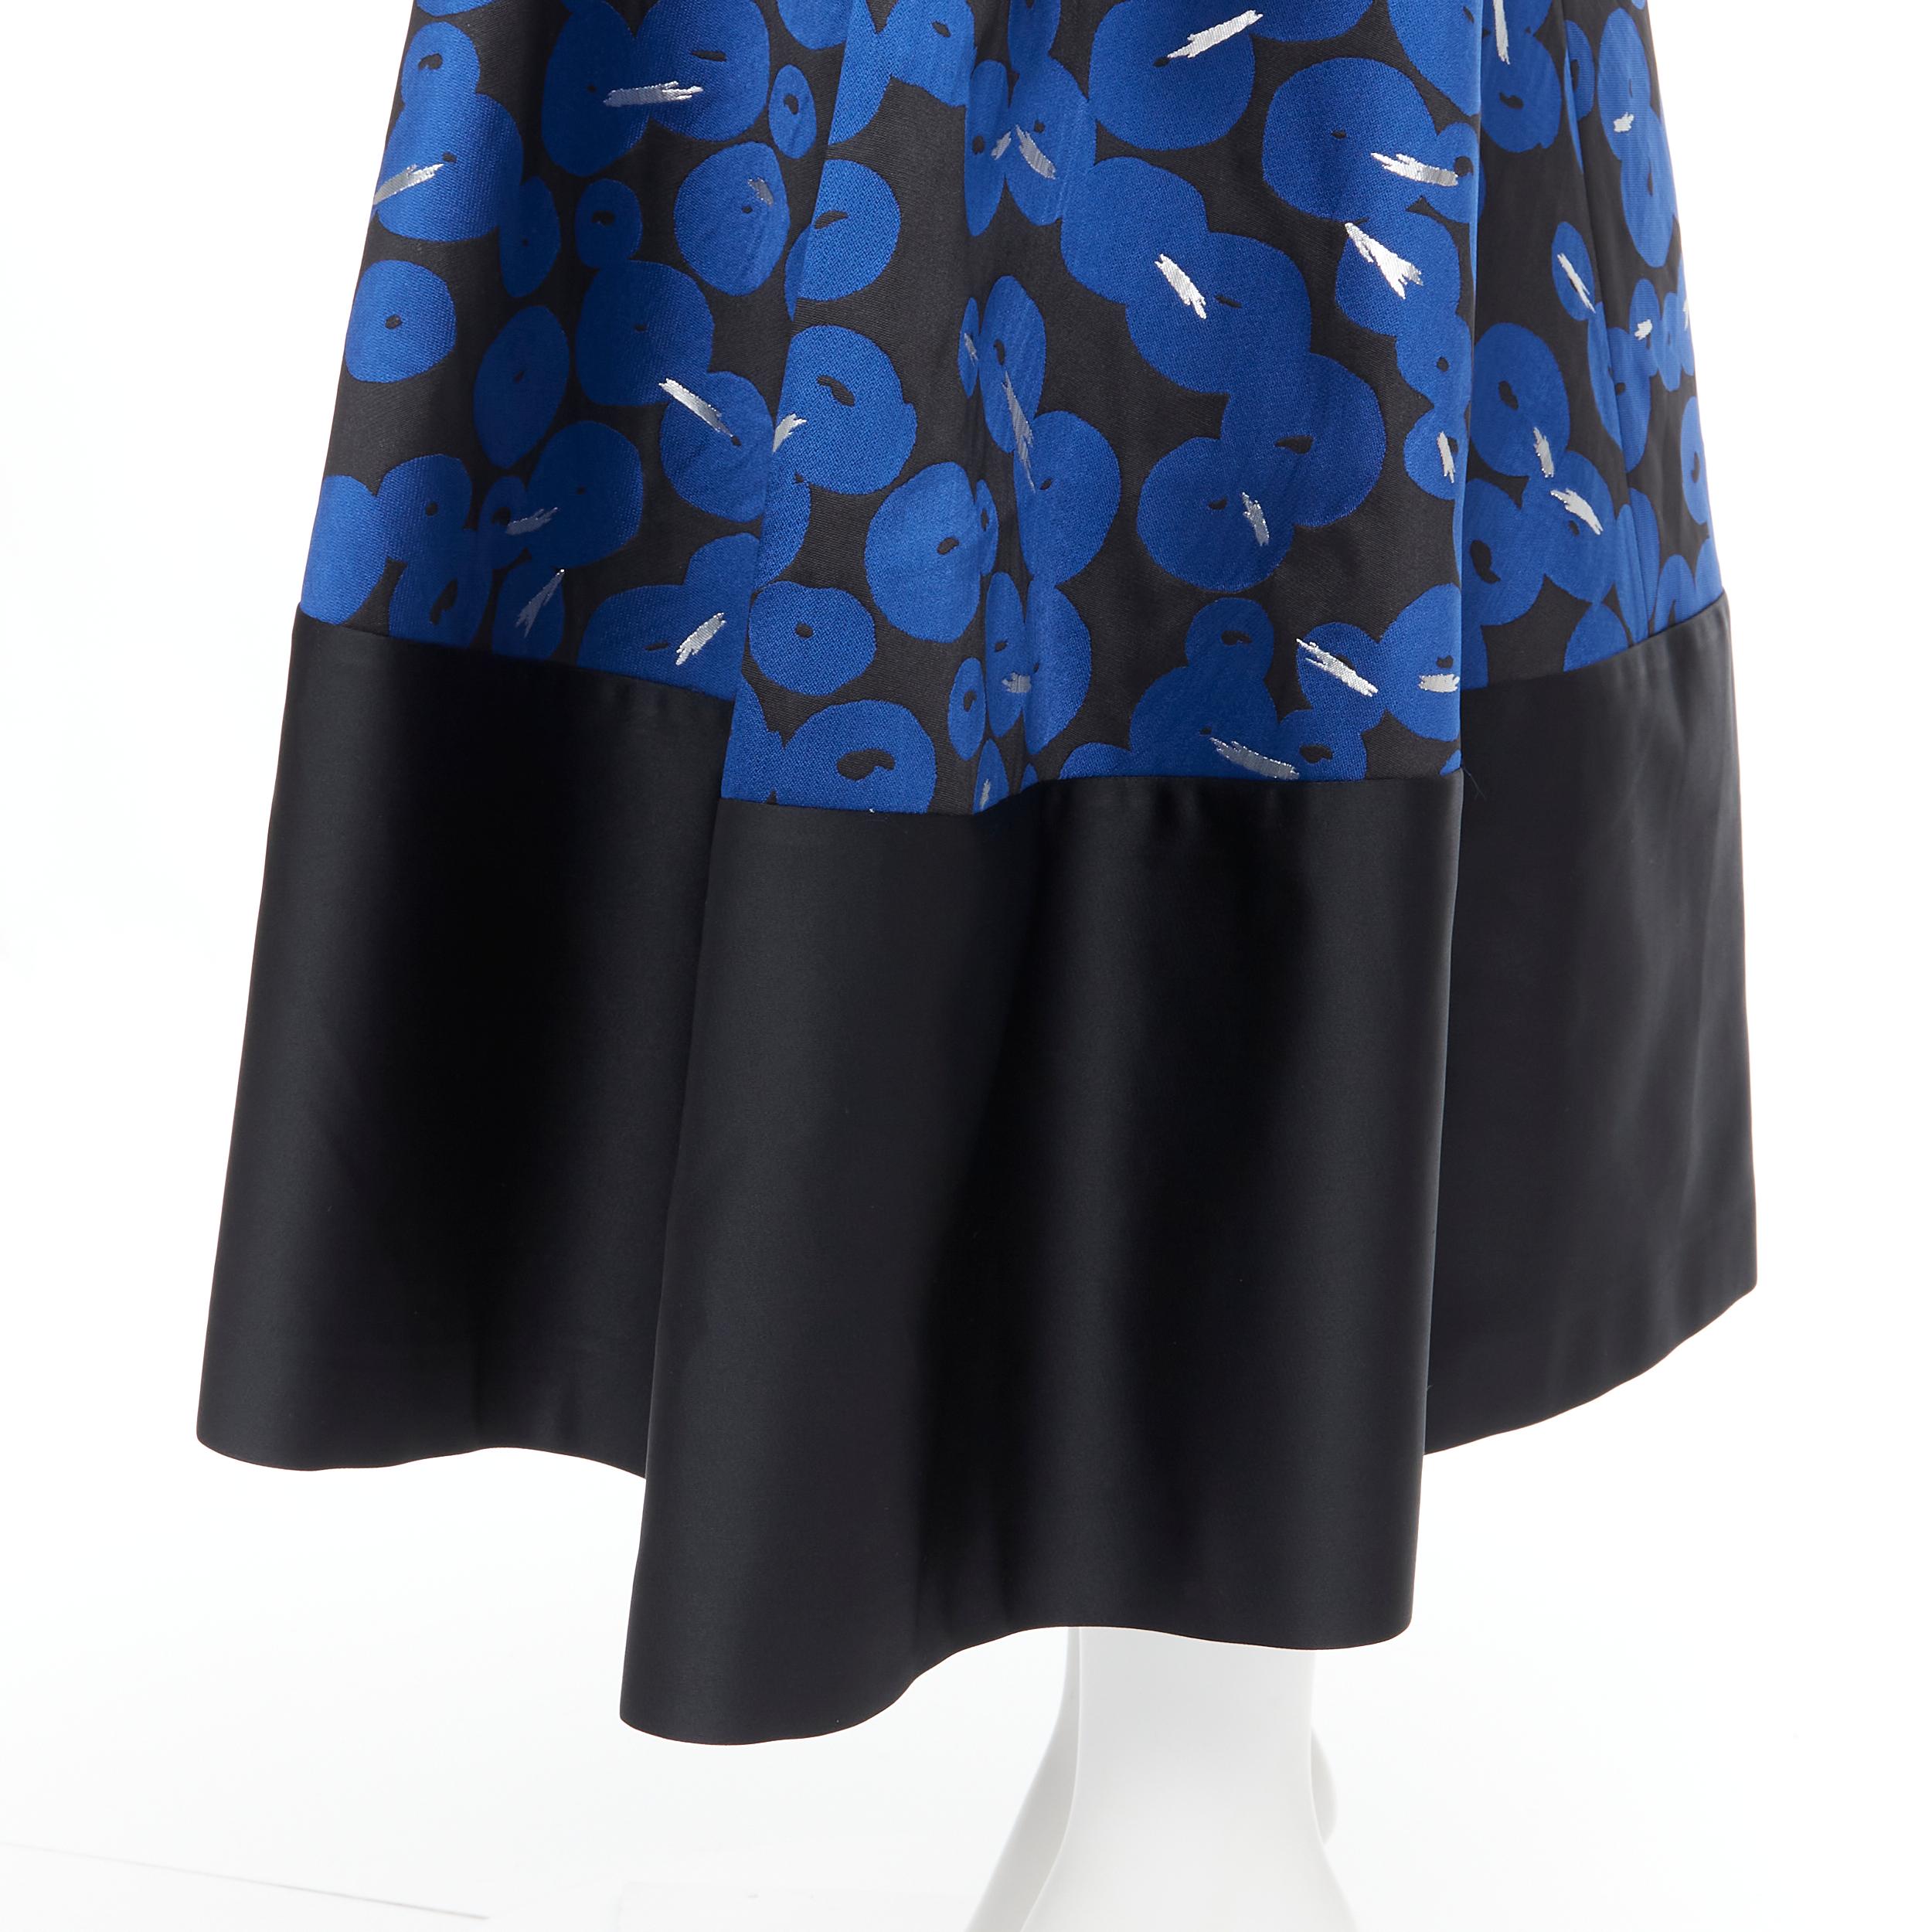 JIL SANDER NAVY blue black silver flared cocktail skirt FR32 XS 
Reference: LNKO/A01752 
Brand: Jil Sander 
Material: Polyester 
Color: Blue 
Pattern: Geometric 
Closure: Zip 
Extra Detail: Dual front pockets along pleat. 
Made in: Italy